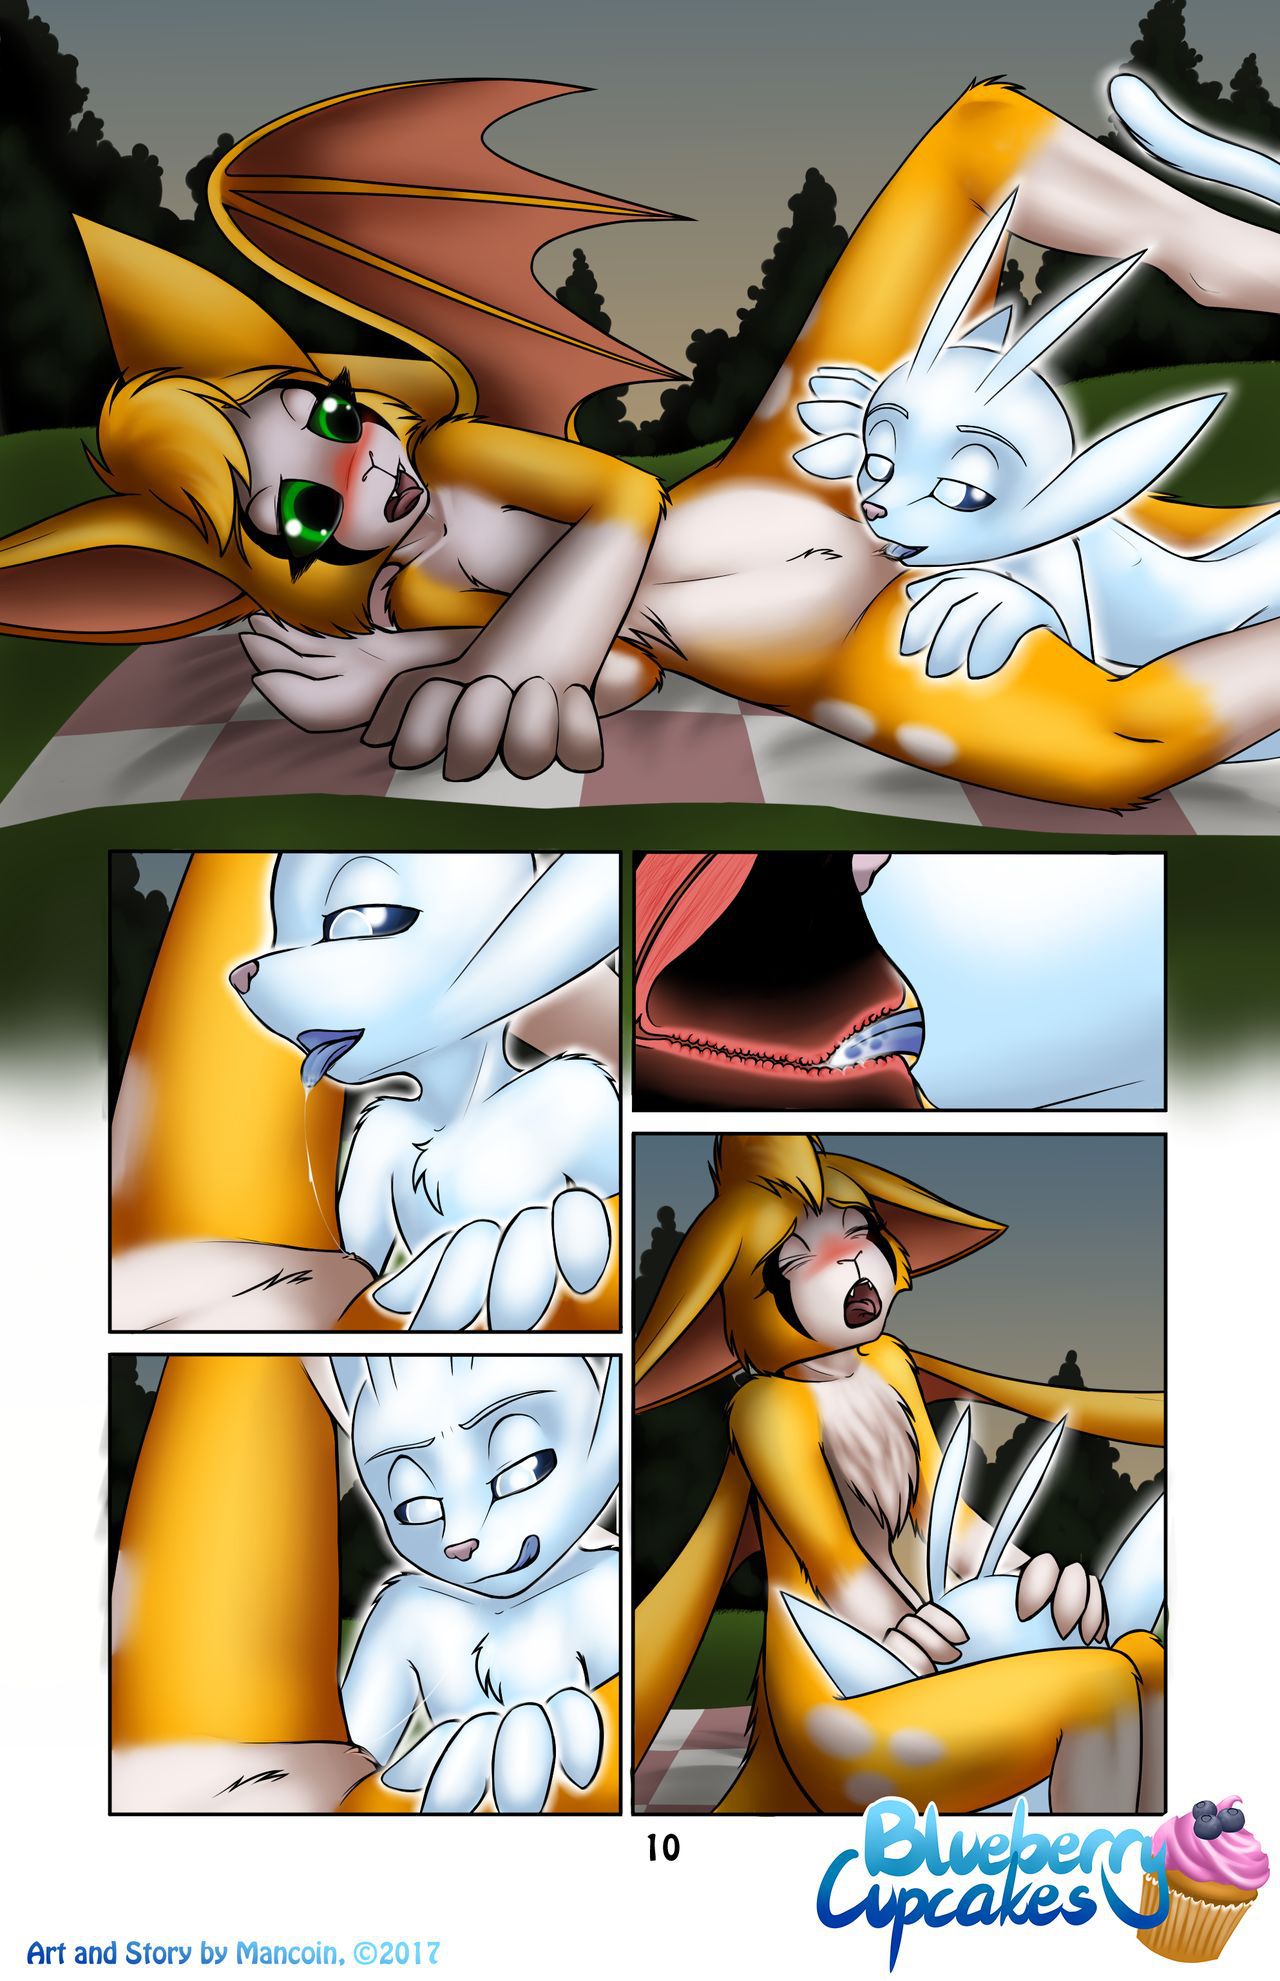 [Mancoin] BlueBerry Cupcakes Ch. 1-2 (Dust An Elysian Tail, Ori and The Blind Forest) [Ongoing] 11